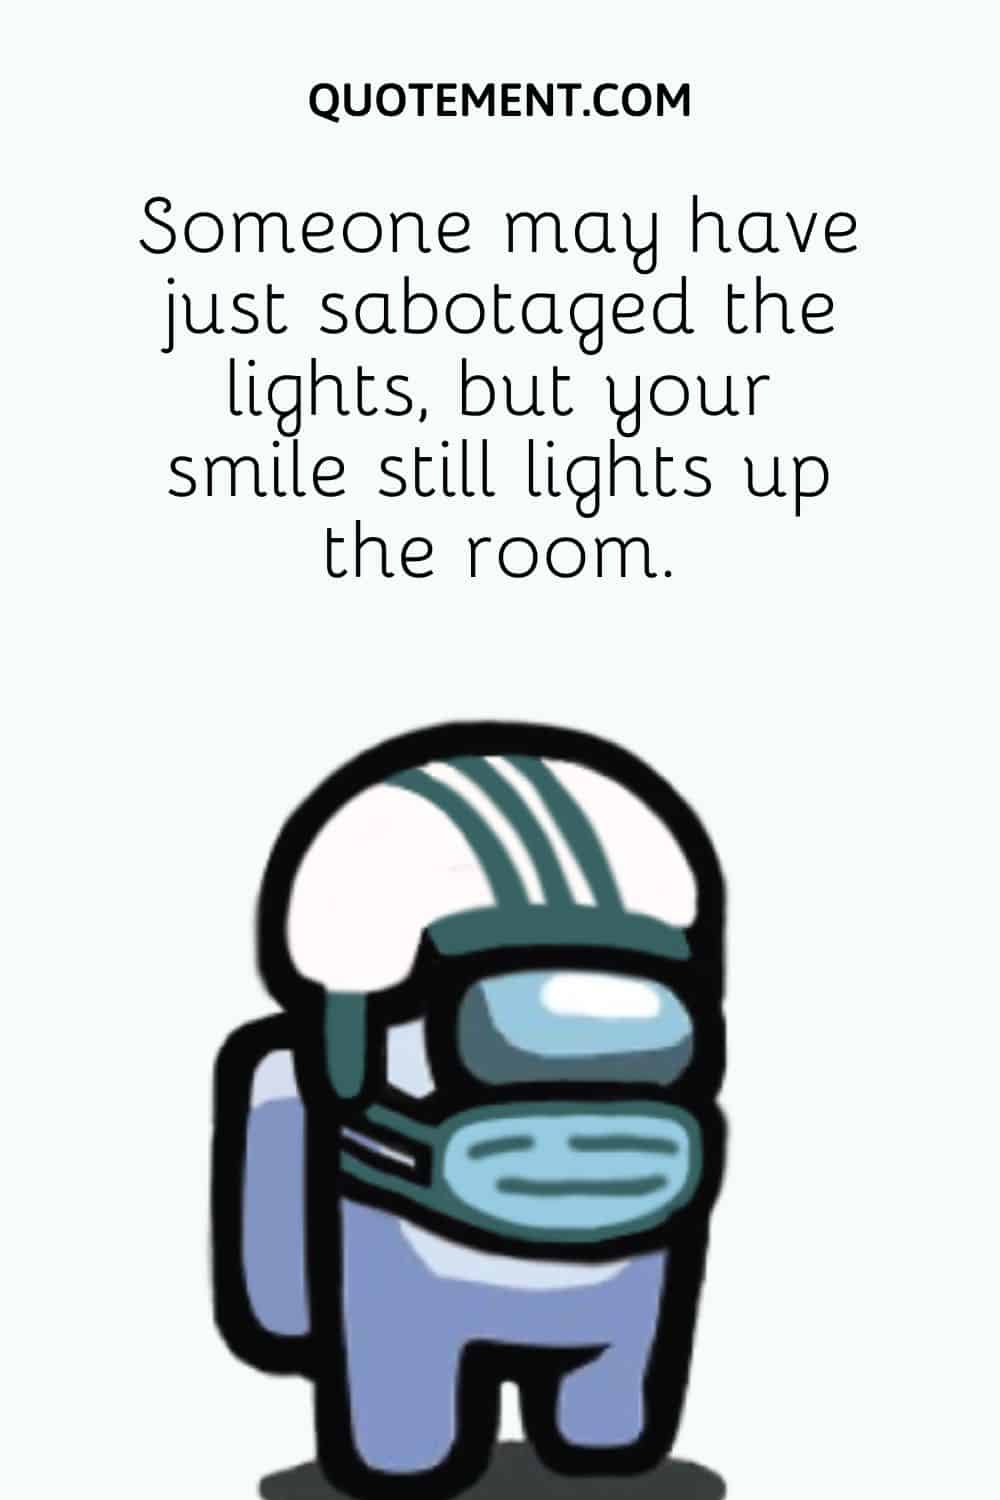 Someone may have just sabotaged the lights, but your smile still lights up the room.